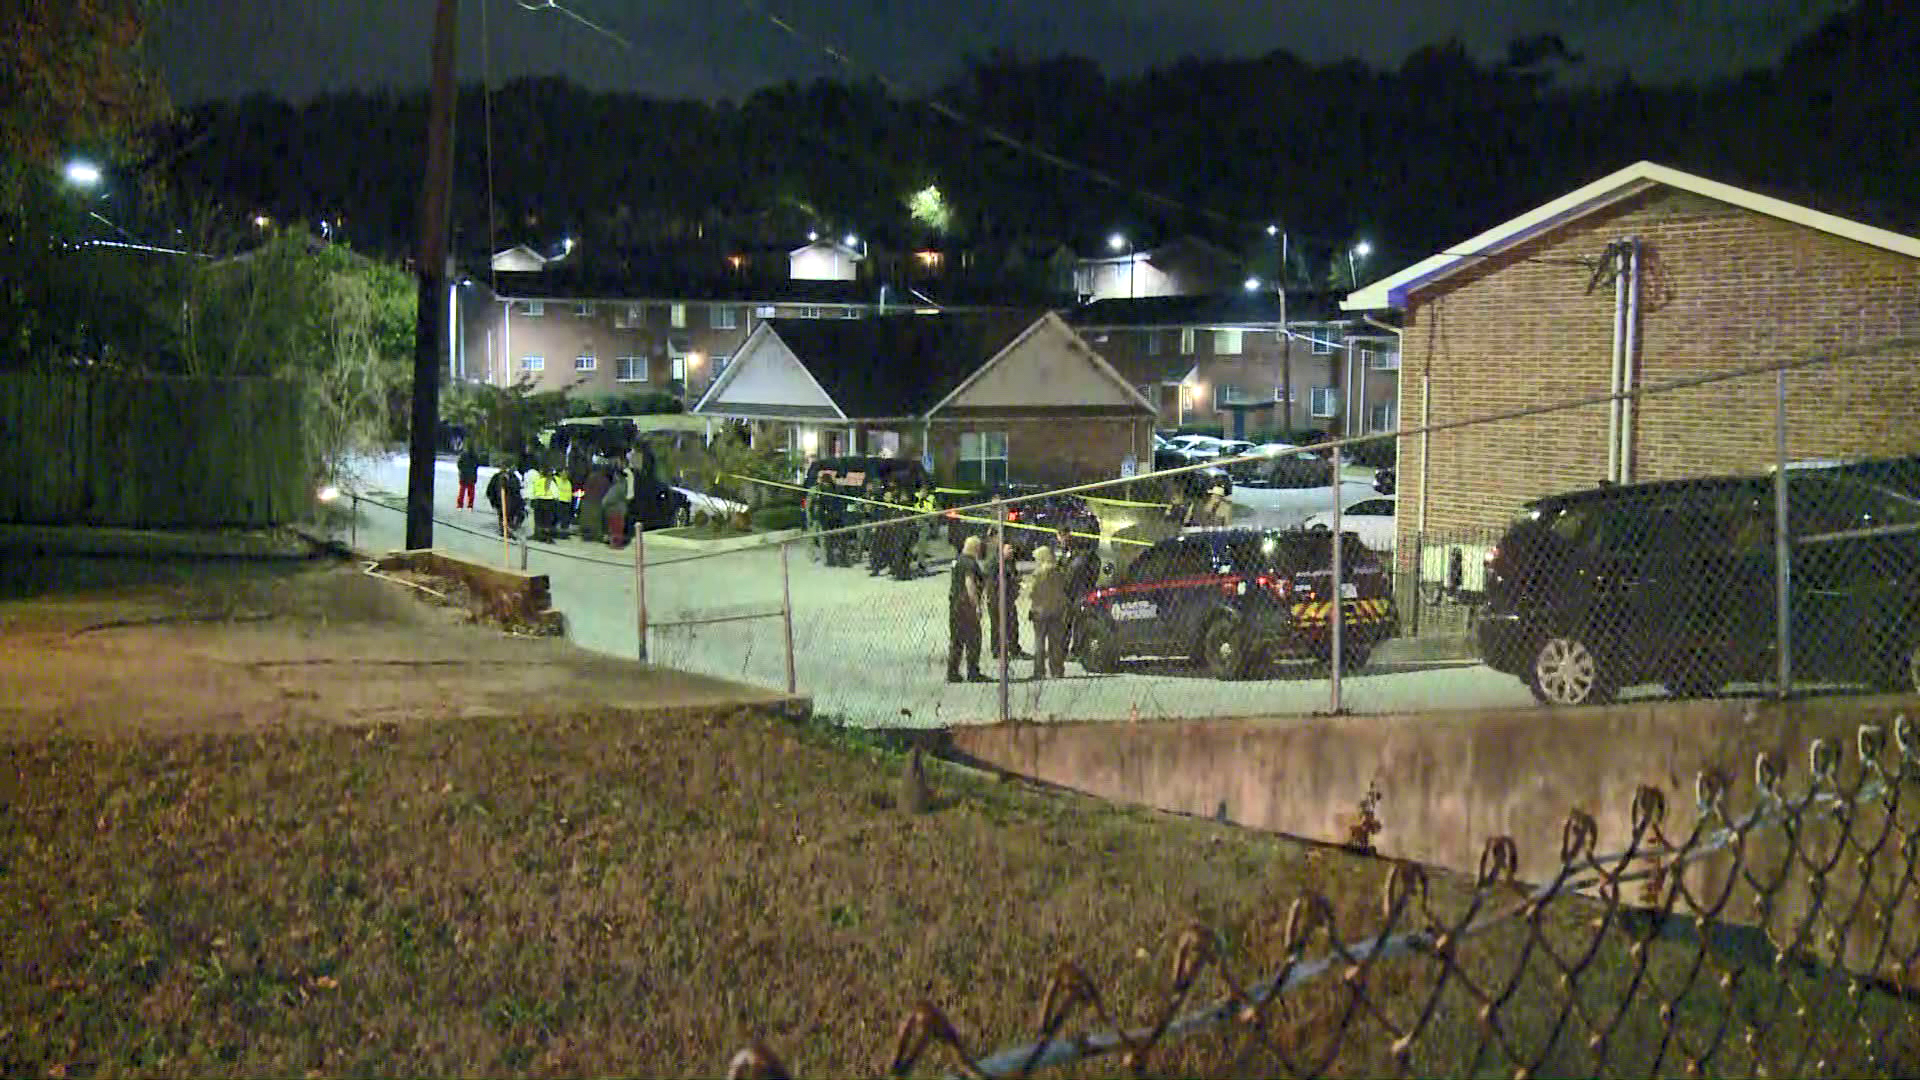 The teen was visiting a friend at an apartment complex when she was shot by a bullet that came from an upstairs unit.